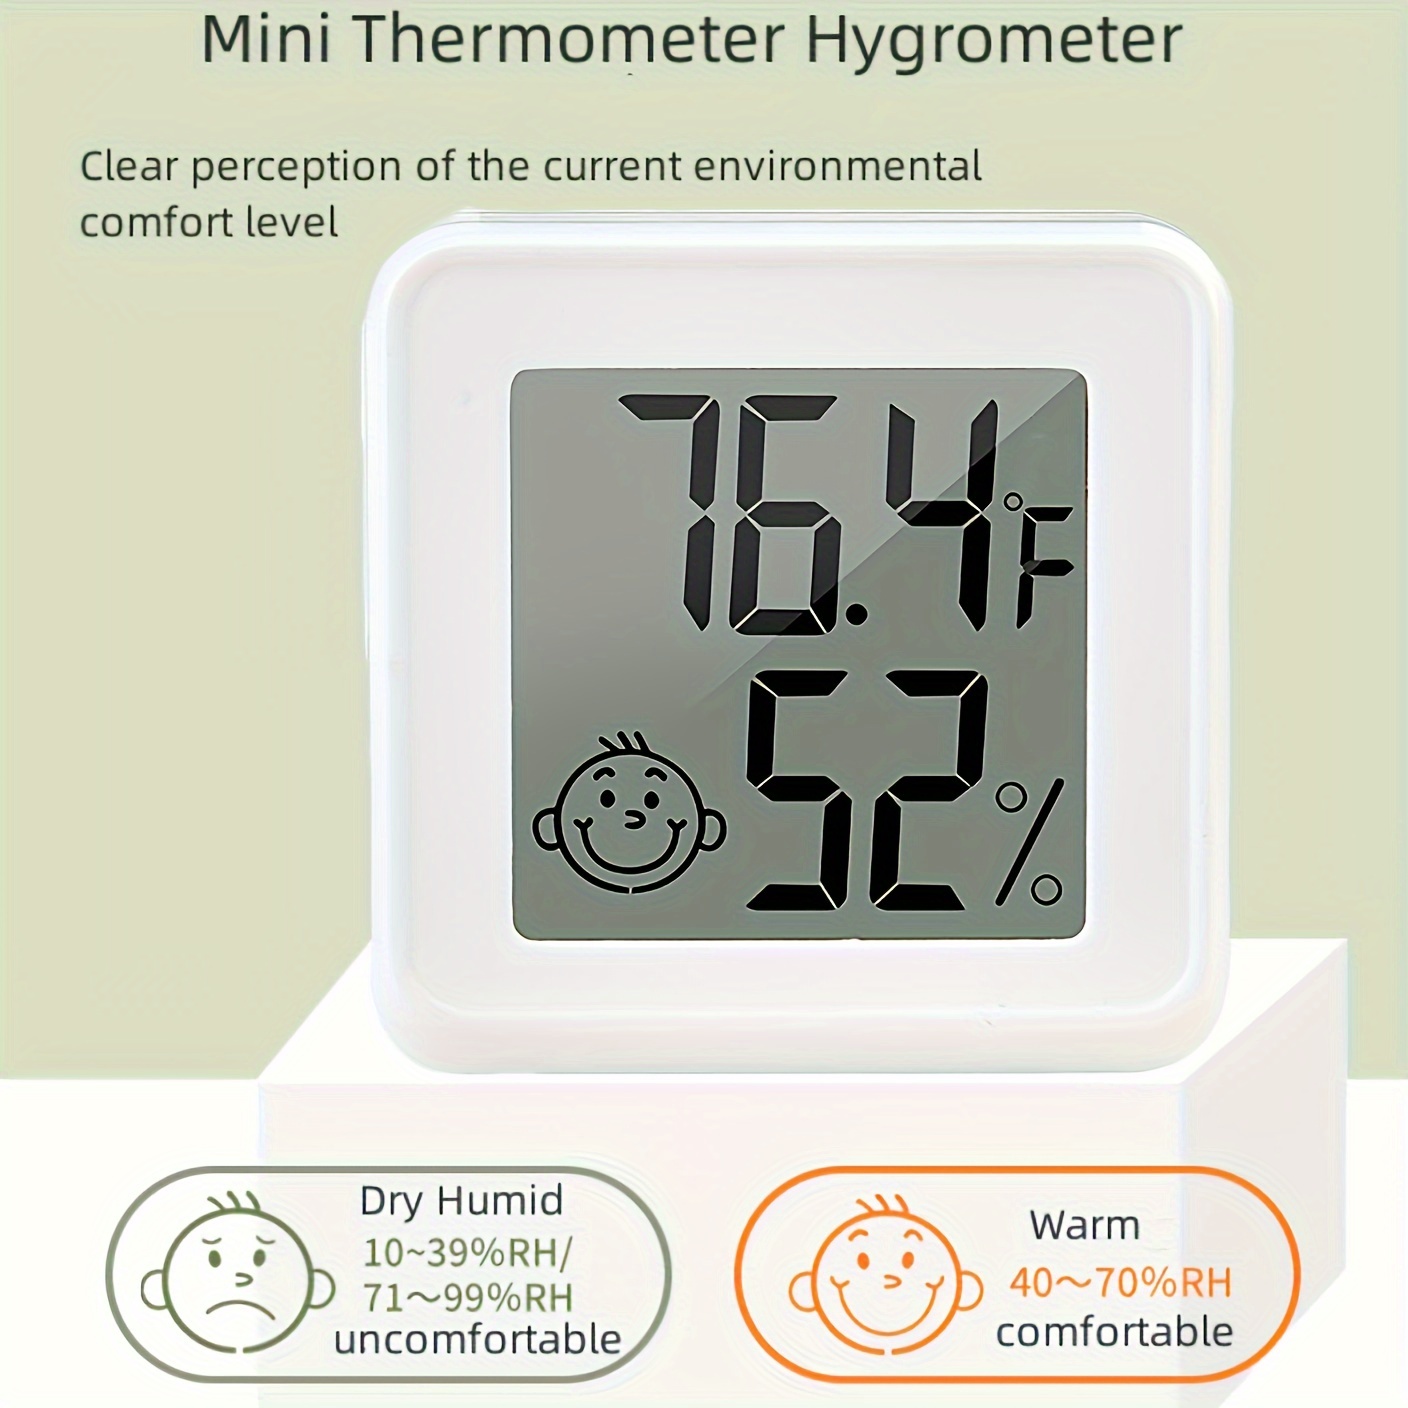 Vaikby Wireless Hygrometer Thermometer, Smart Humidity Meter With